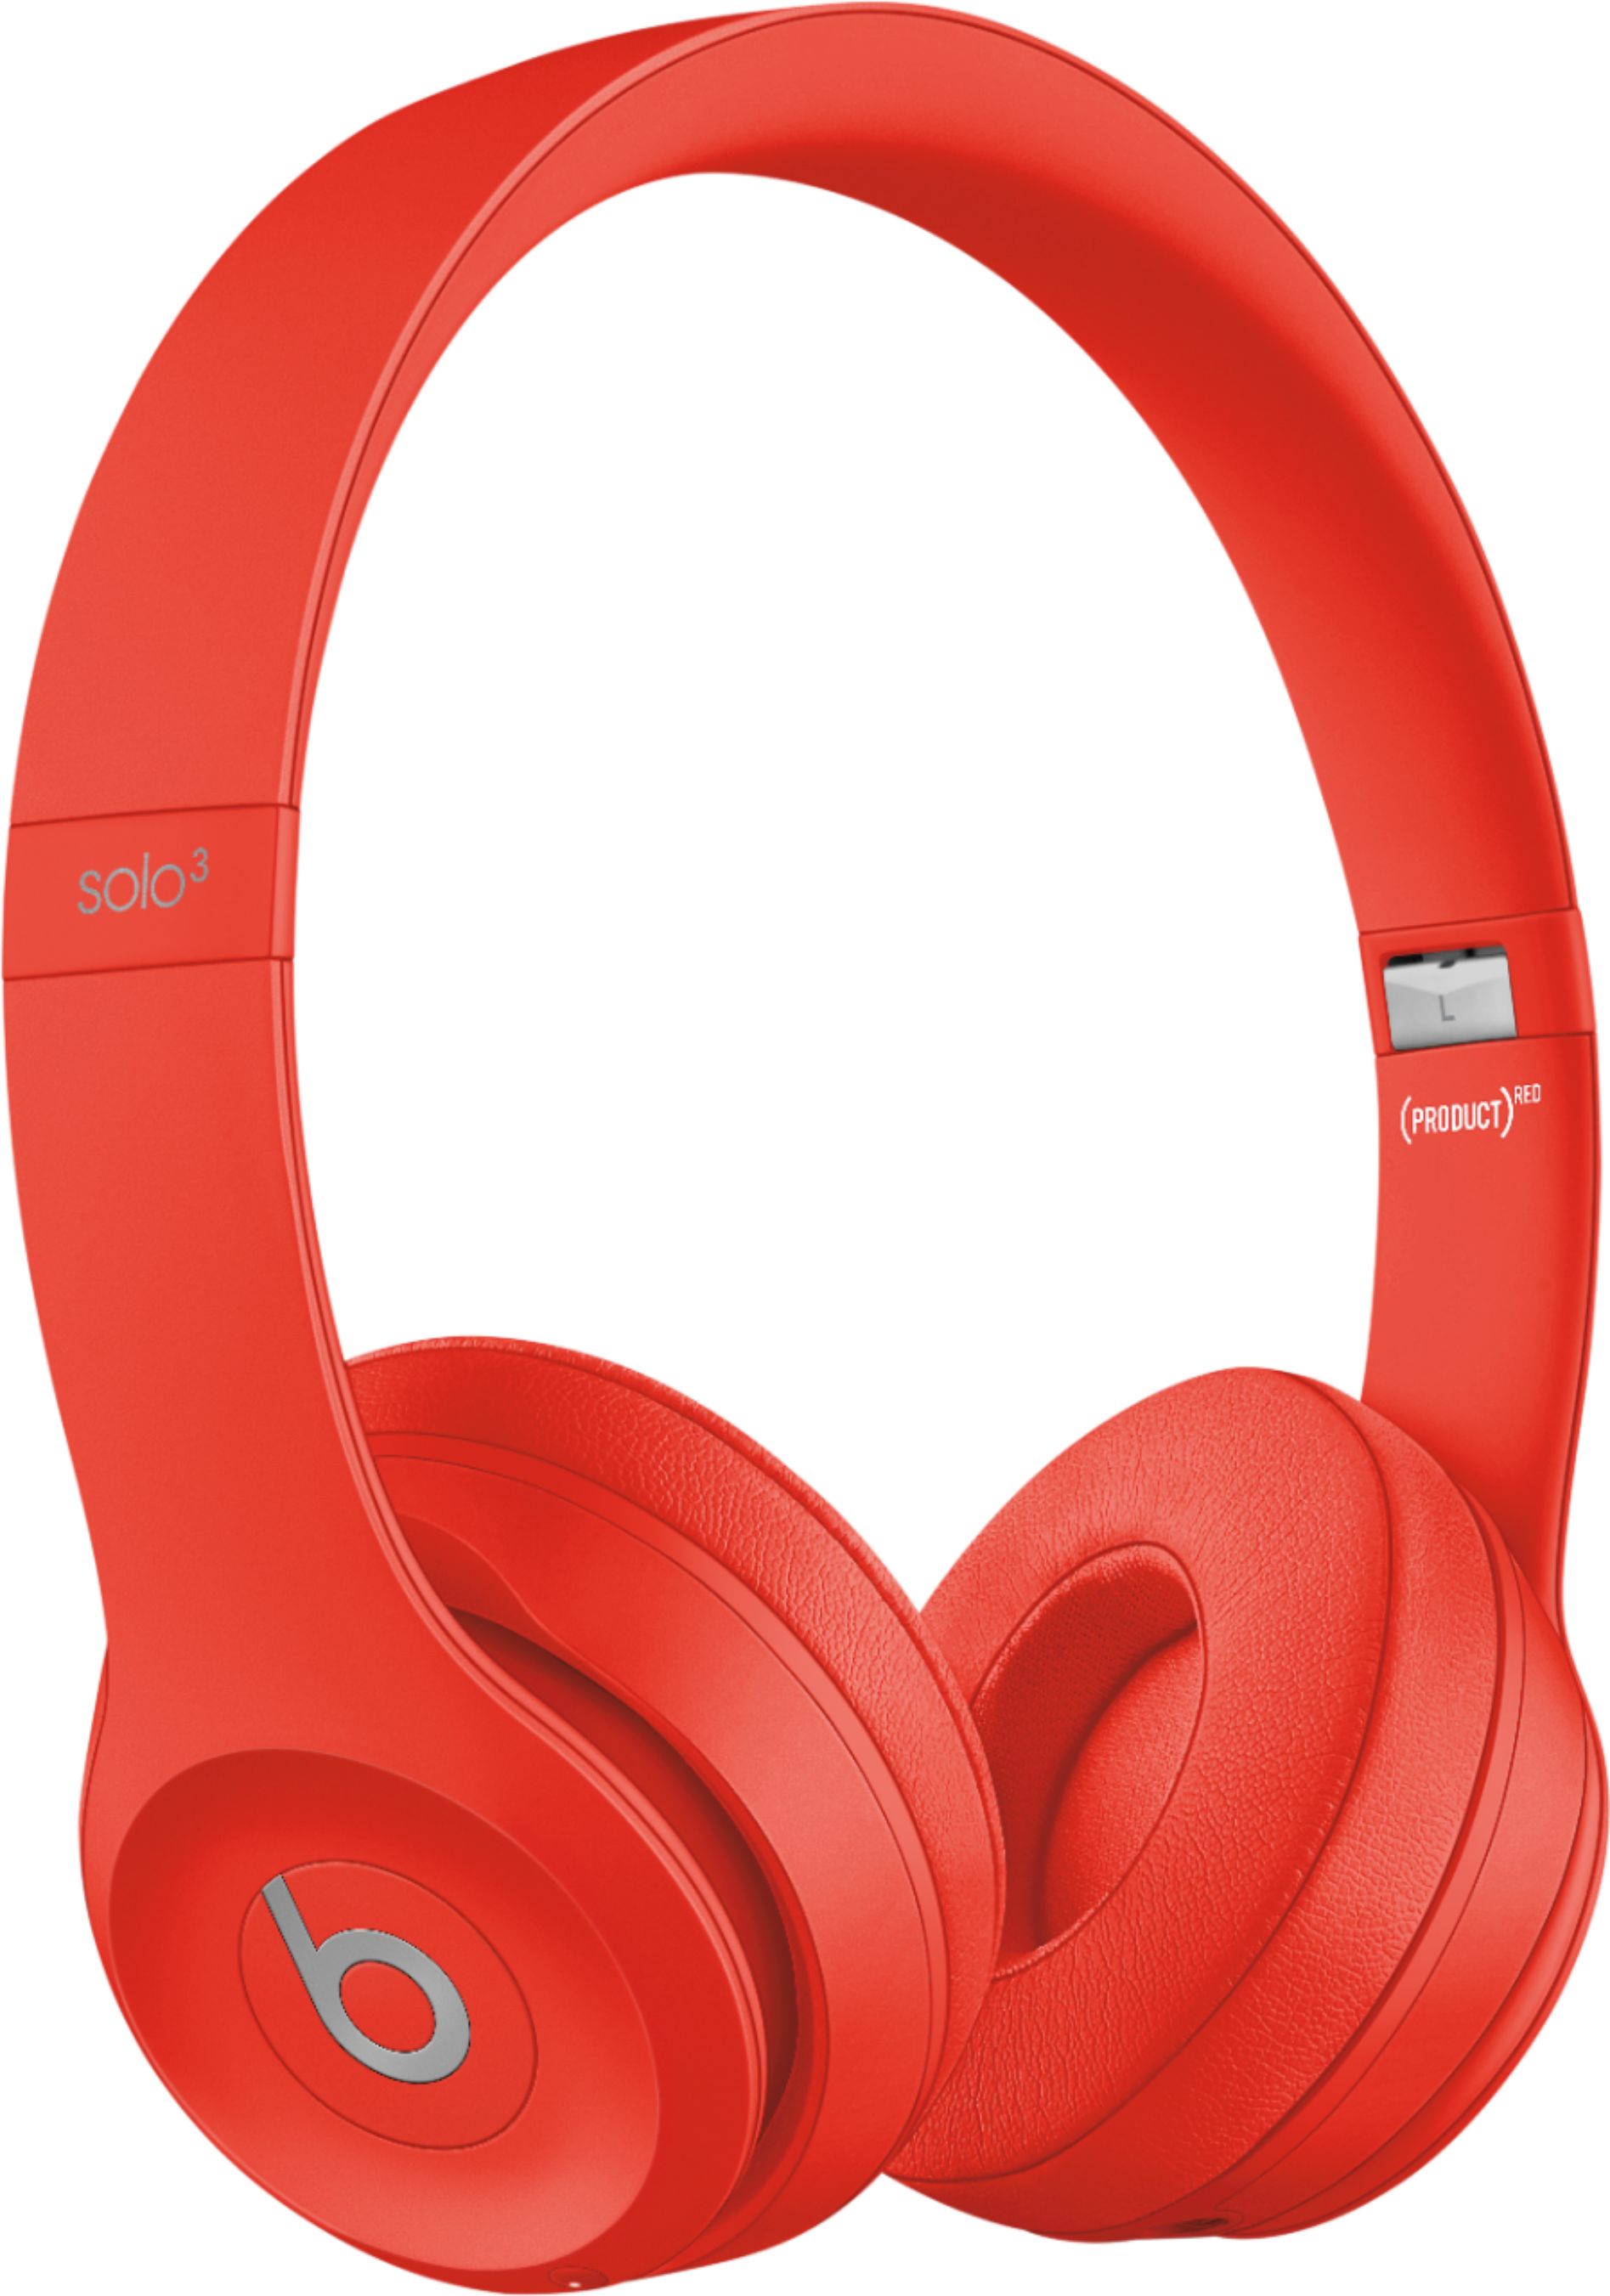 by Dre On-Ear Headphones (PRODUCT)RED Citrus Red MX472LL/A - Best Buy